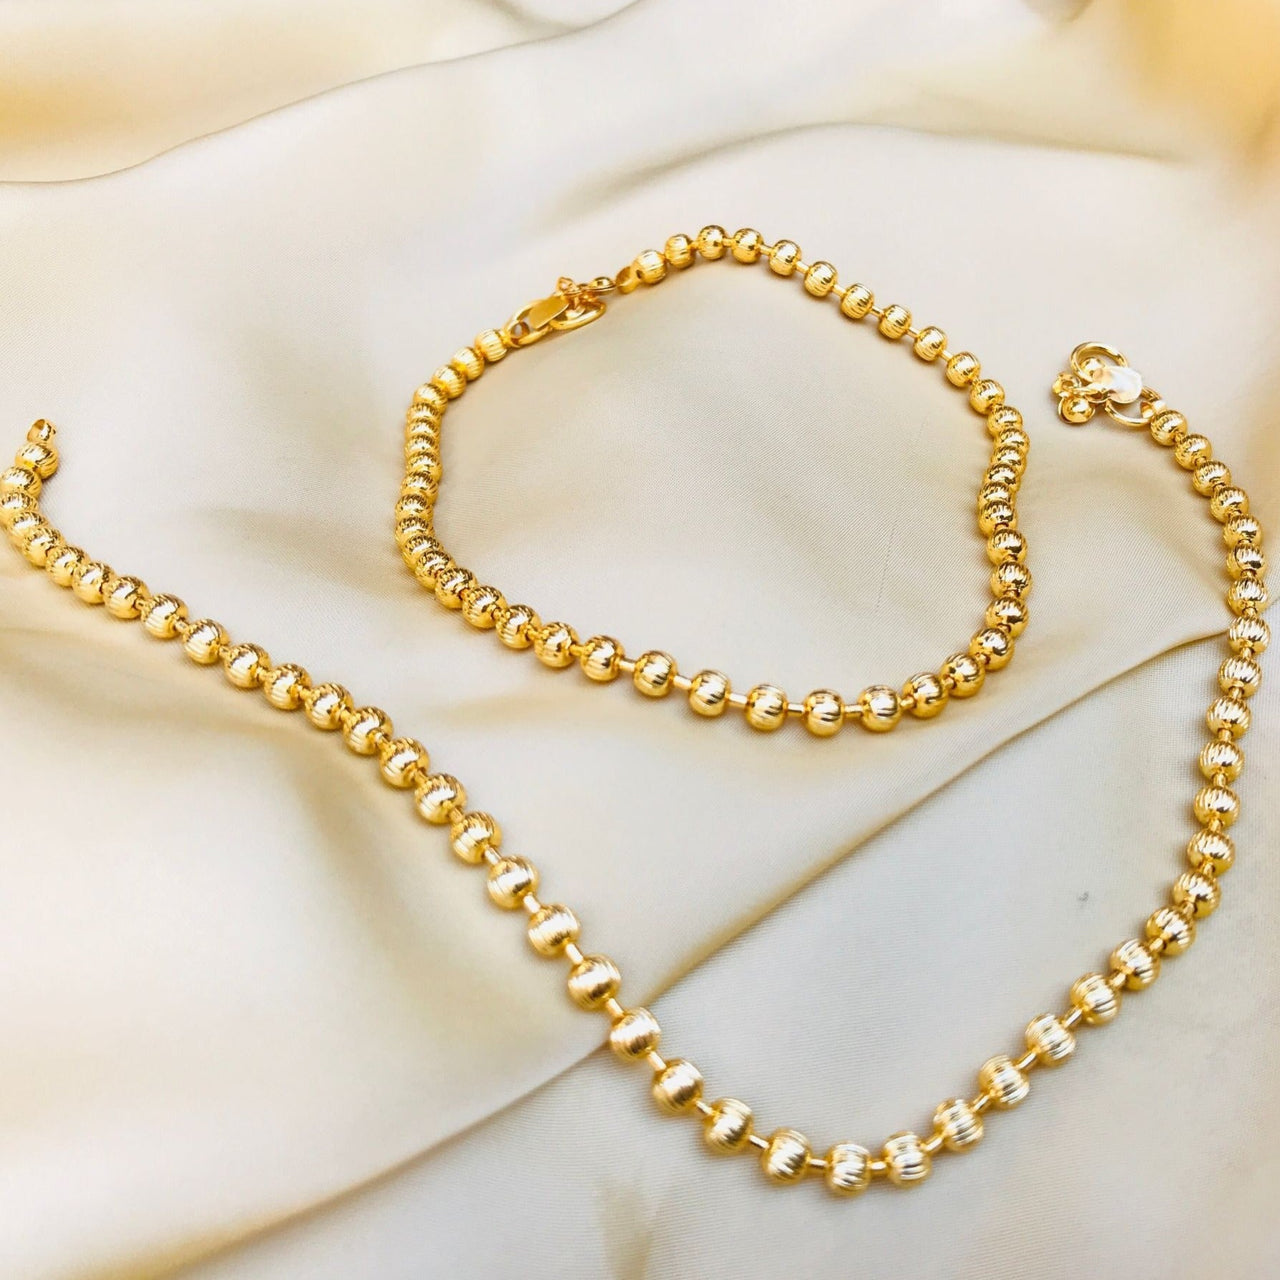 HIGH QUALITY GOLD PLATED BALL ANKLET